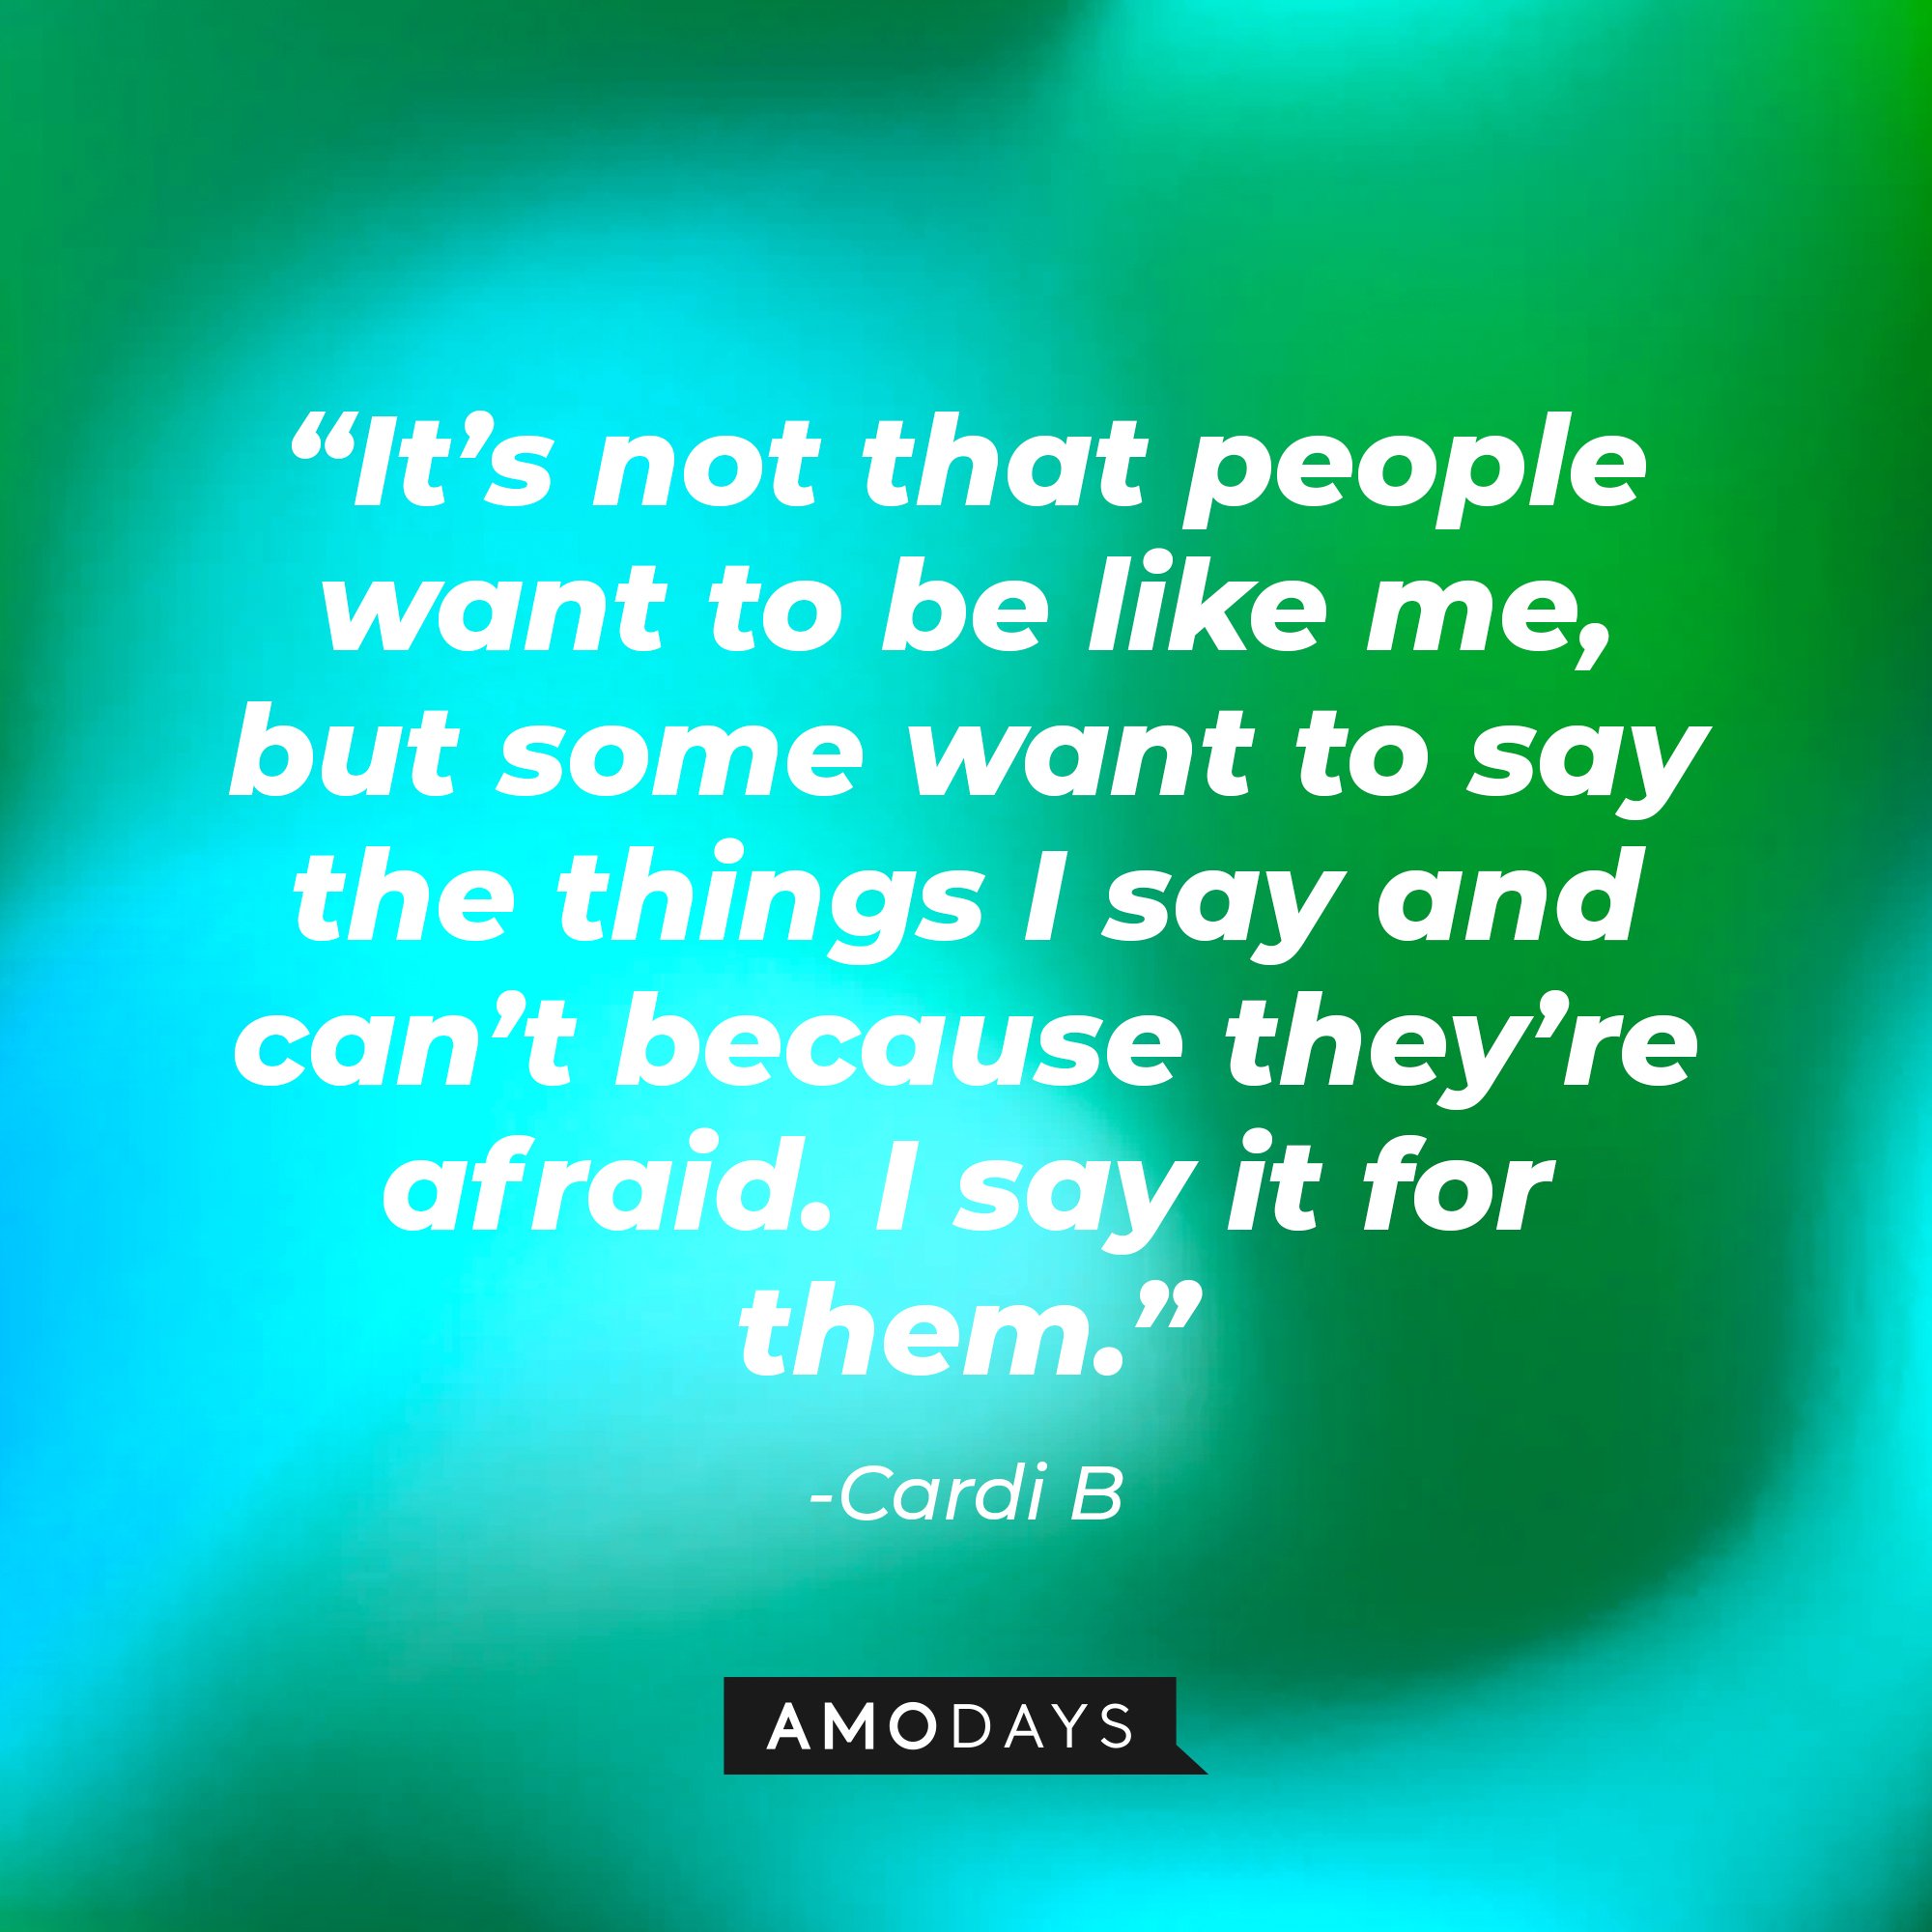 Cardi B's quotes: "It's not that people want to be like me, but some want to say the things I say and can't because they're afraid. I say it for them." | Image: AmoDays